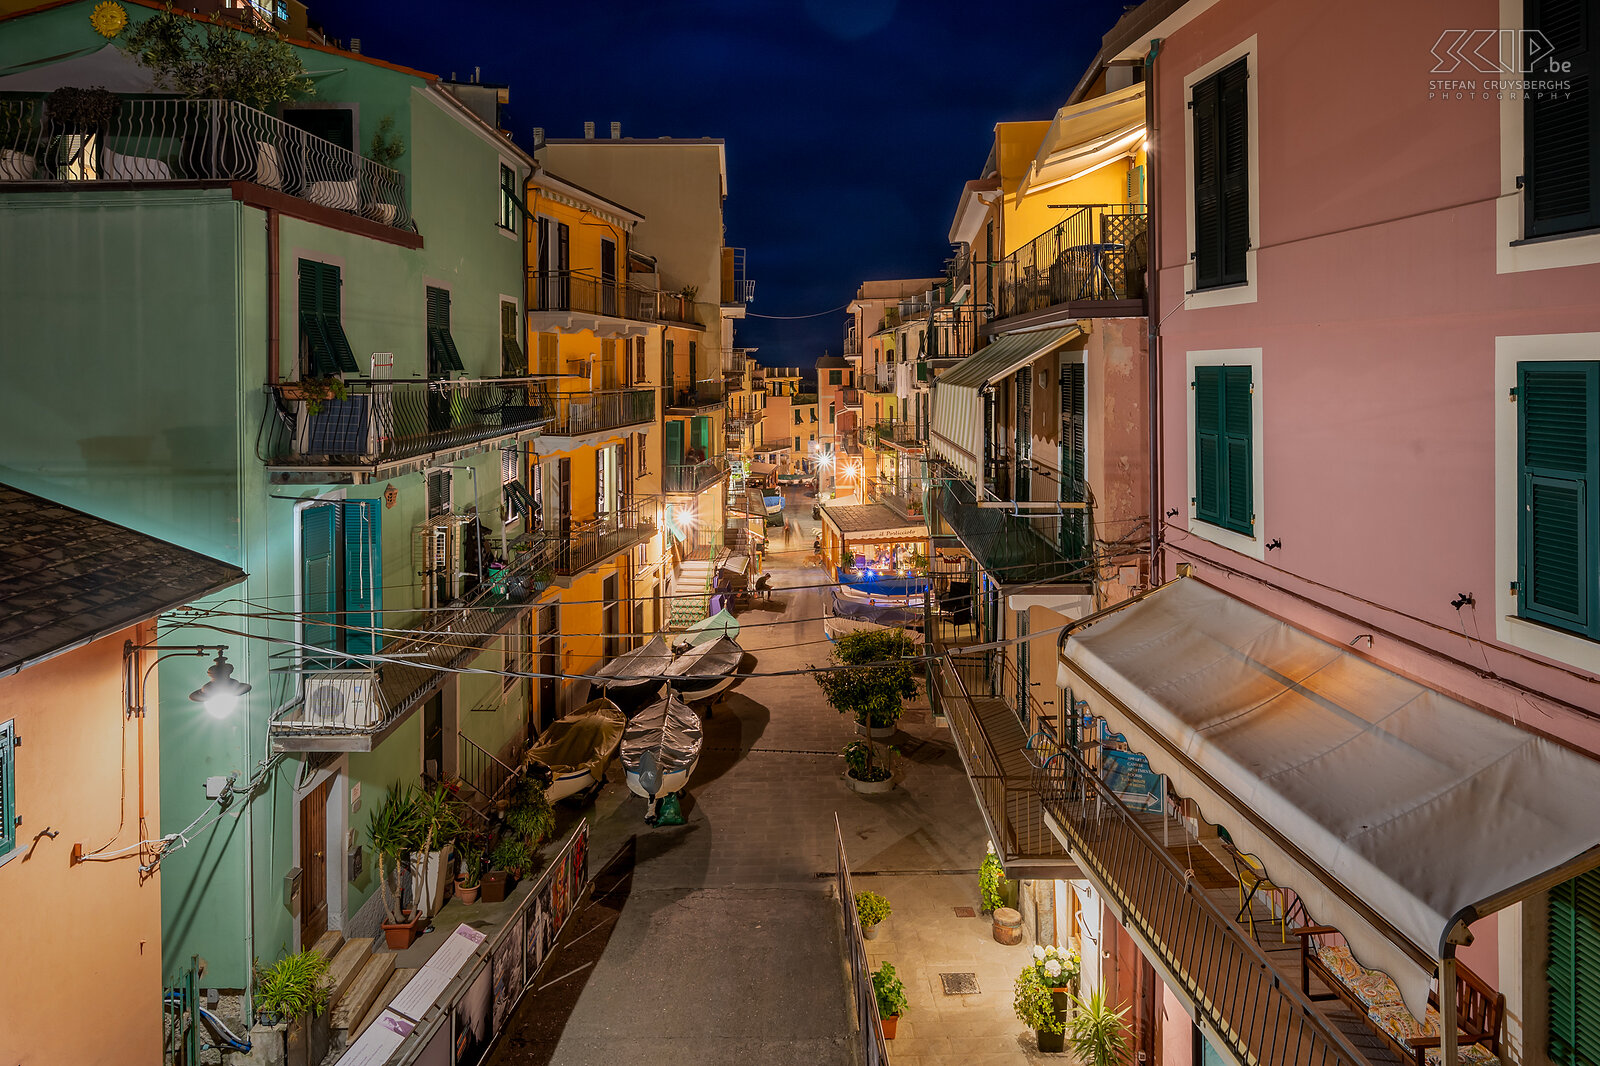 Manarola - By night Manarola is built on a high rock 70 meters above sea level. This beautiful village of Cinque Terre has a small harbor with a boat ramp, narrow streets with picturesque multi-colored houses overlooking the sea and many fish restaurants. Stefan Cruysberghs